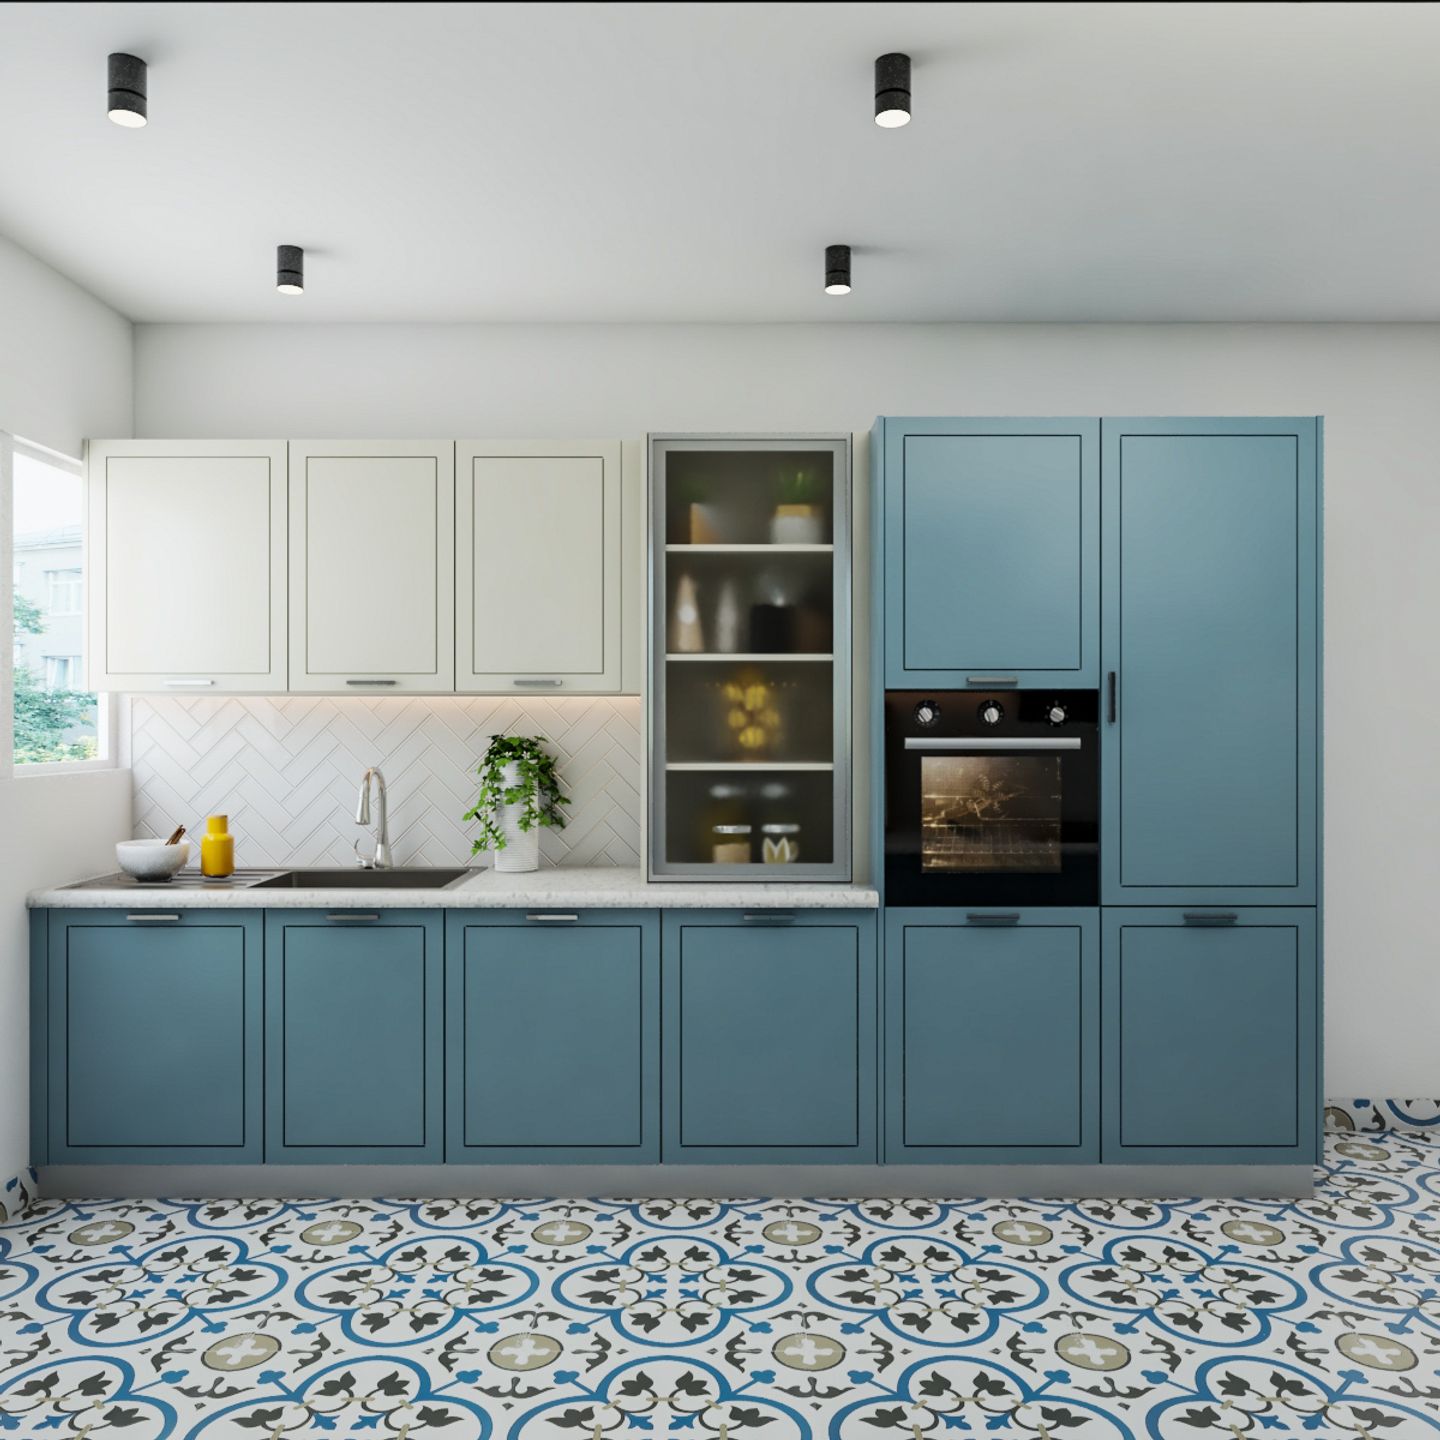 Classic Parallel Modular Kitchen Design In Blue And White